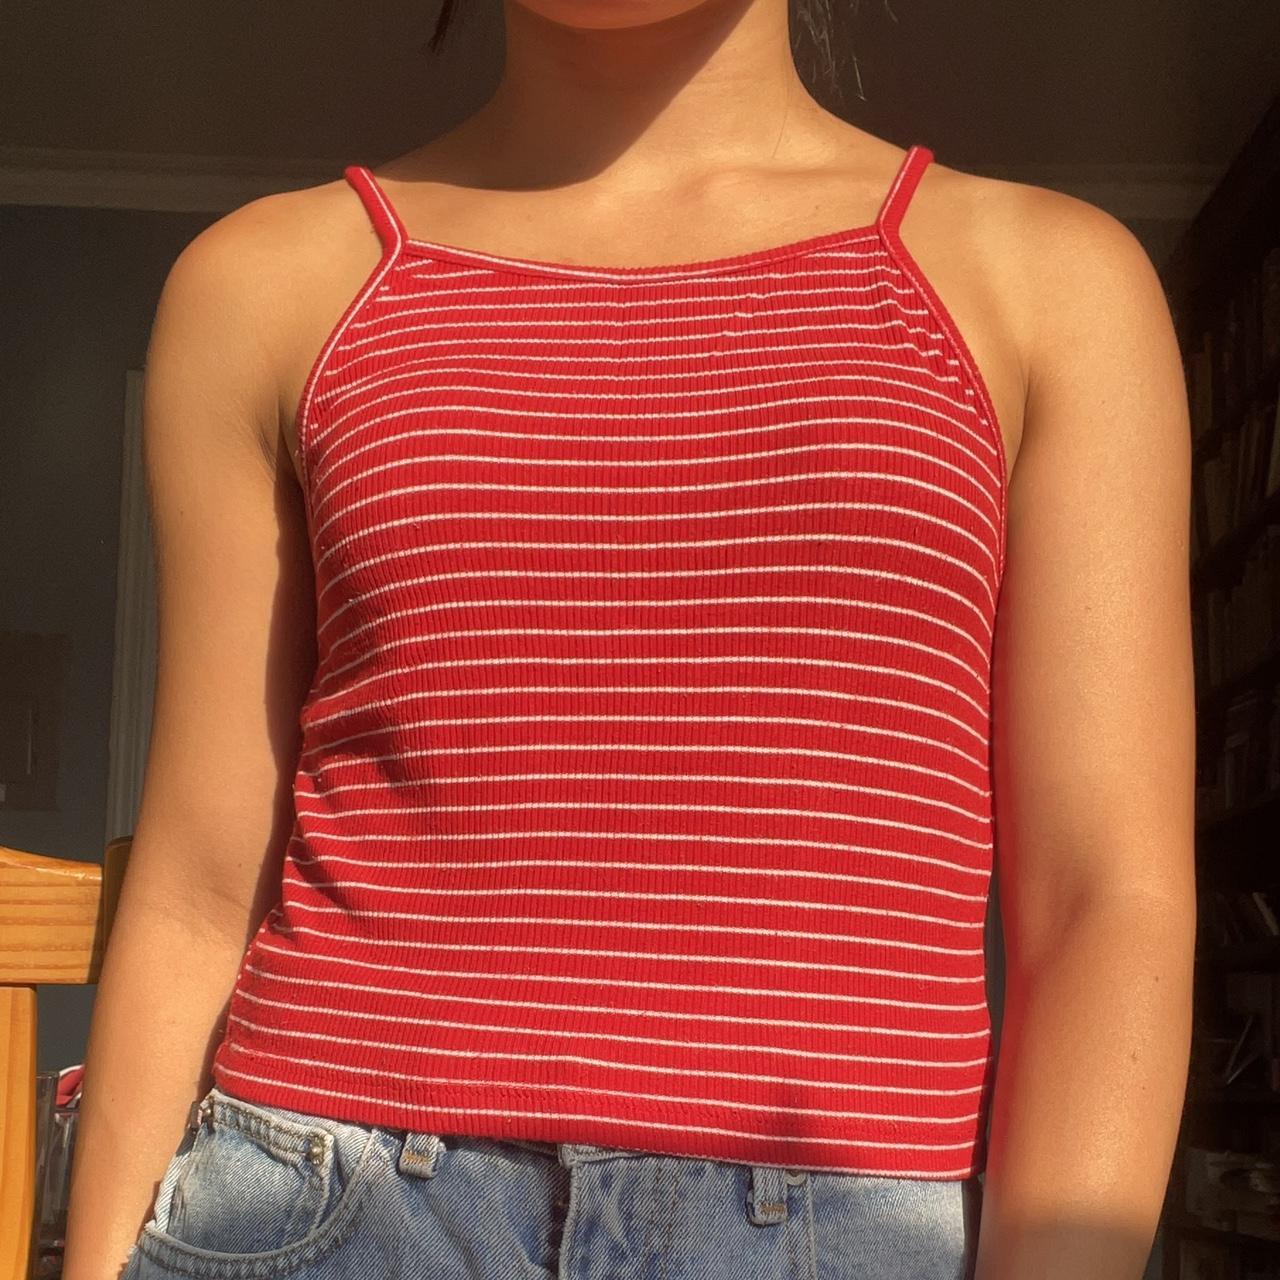 red & white striped tank top from brandy melville!